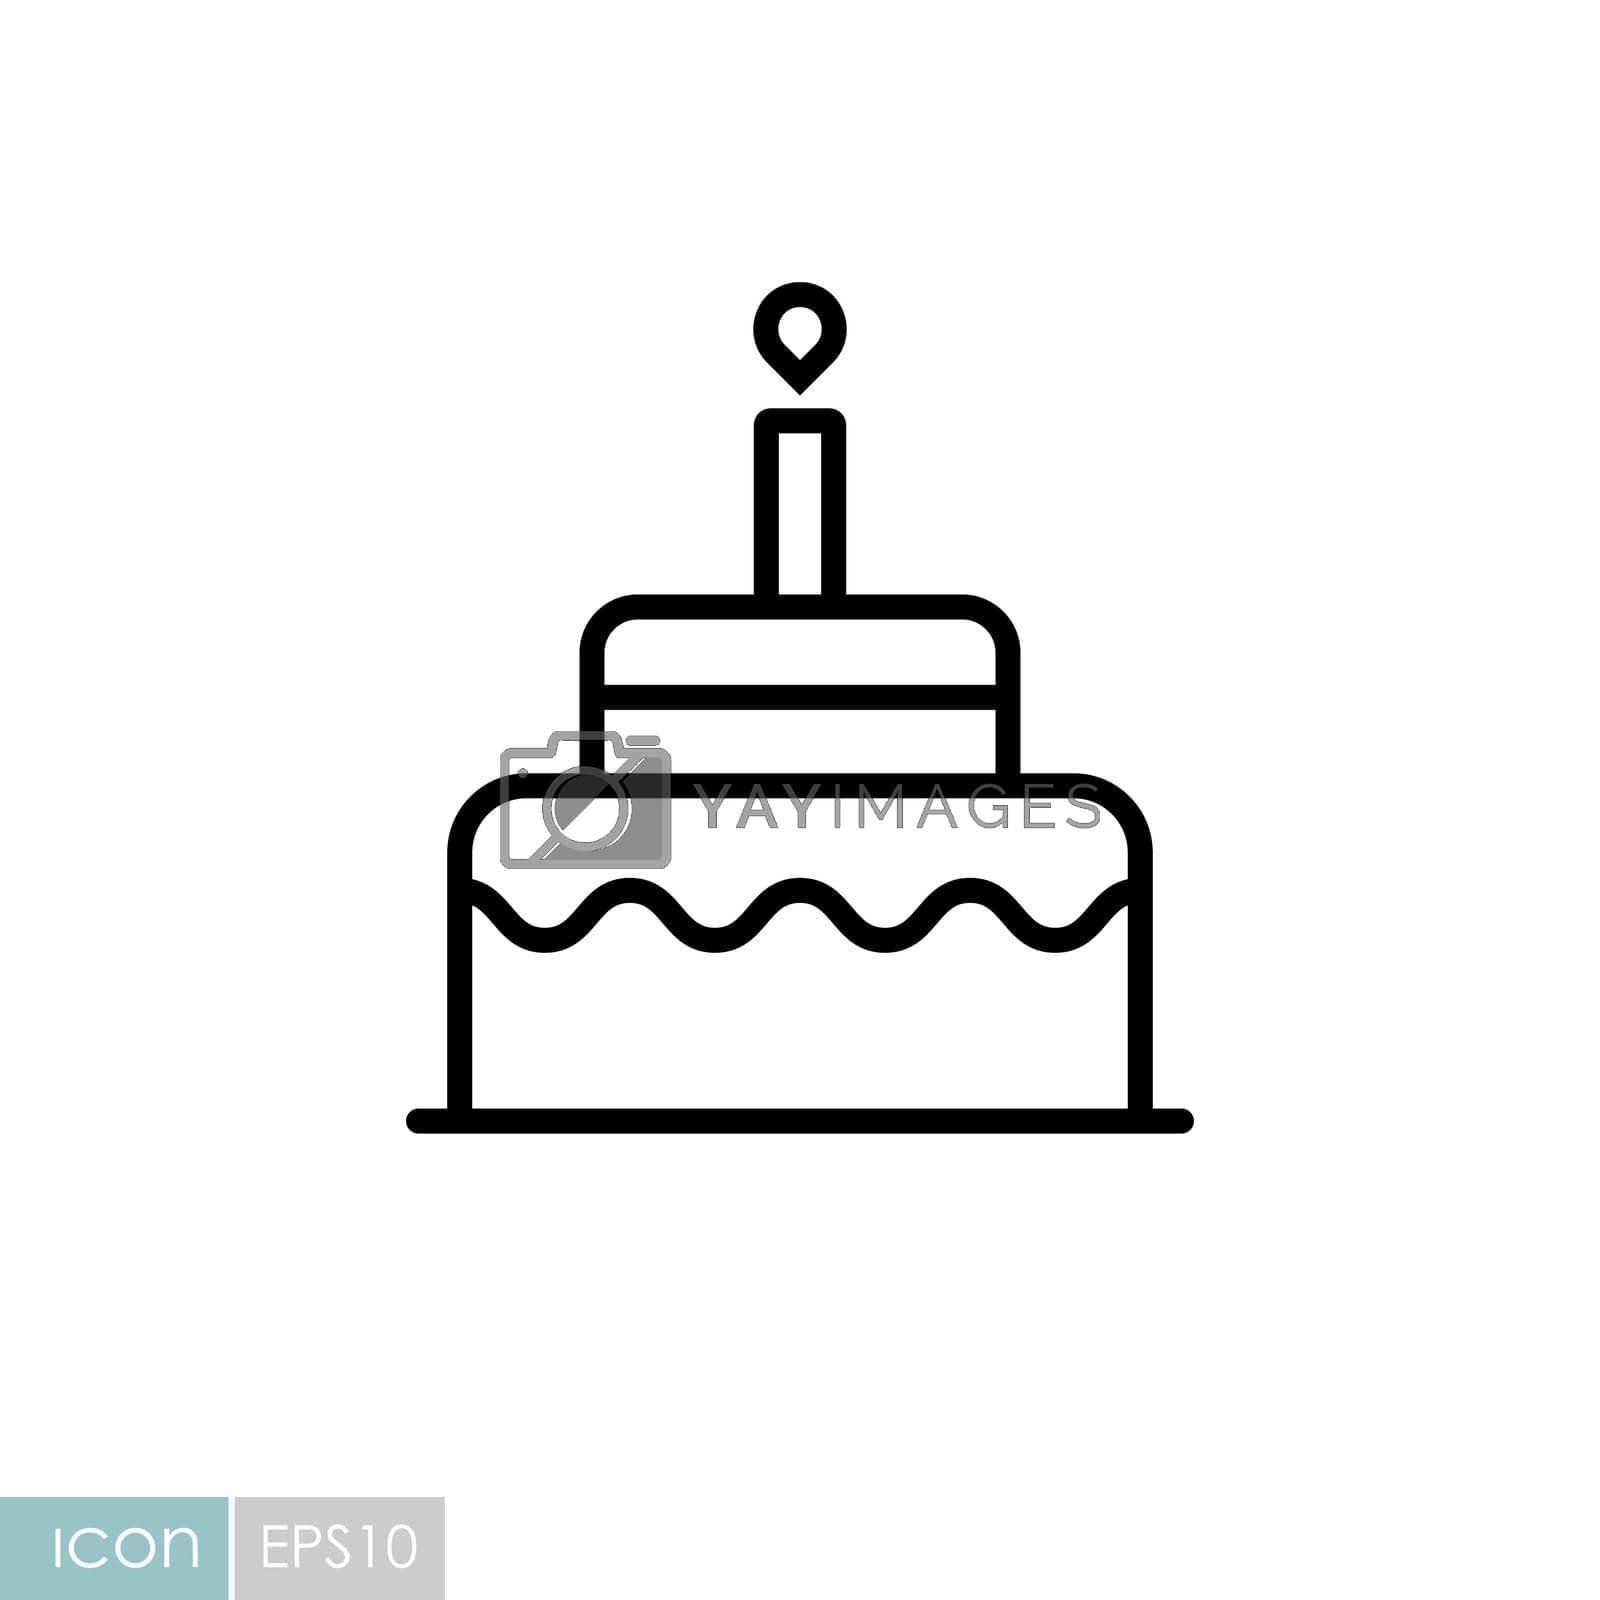 Birthday cake vector isolated icon. Graph symbol for children and newborn babies web site and apps design, logo, app, UI